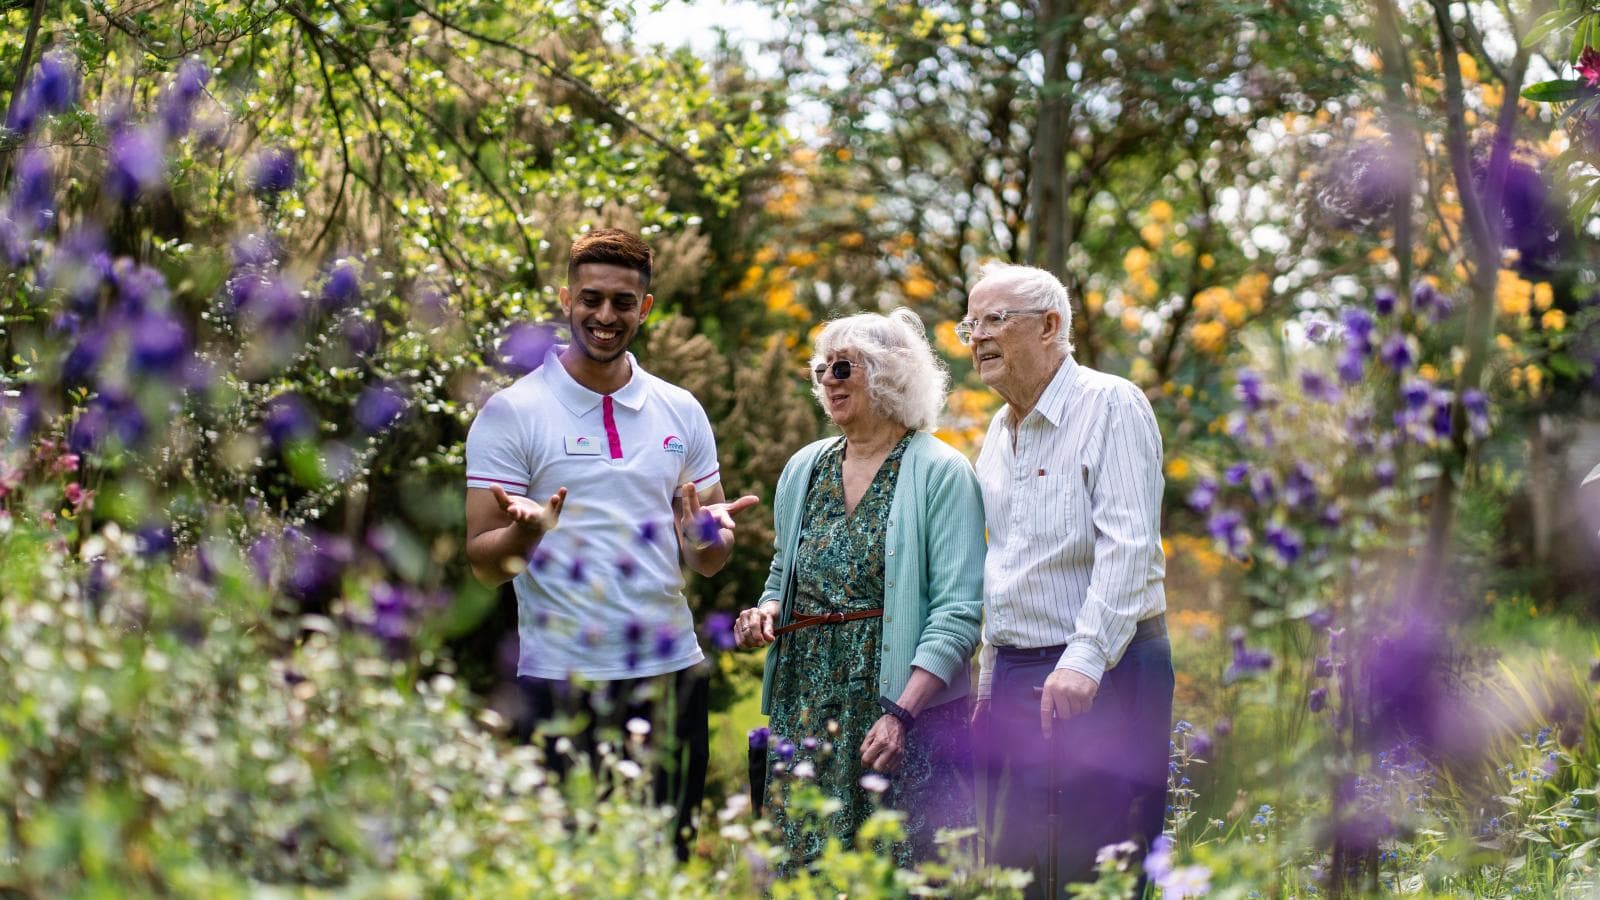 Elderly couple stood with younger man in a garden looking at the flowers together